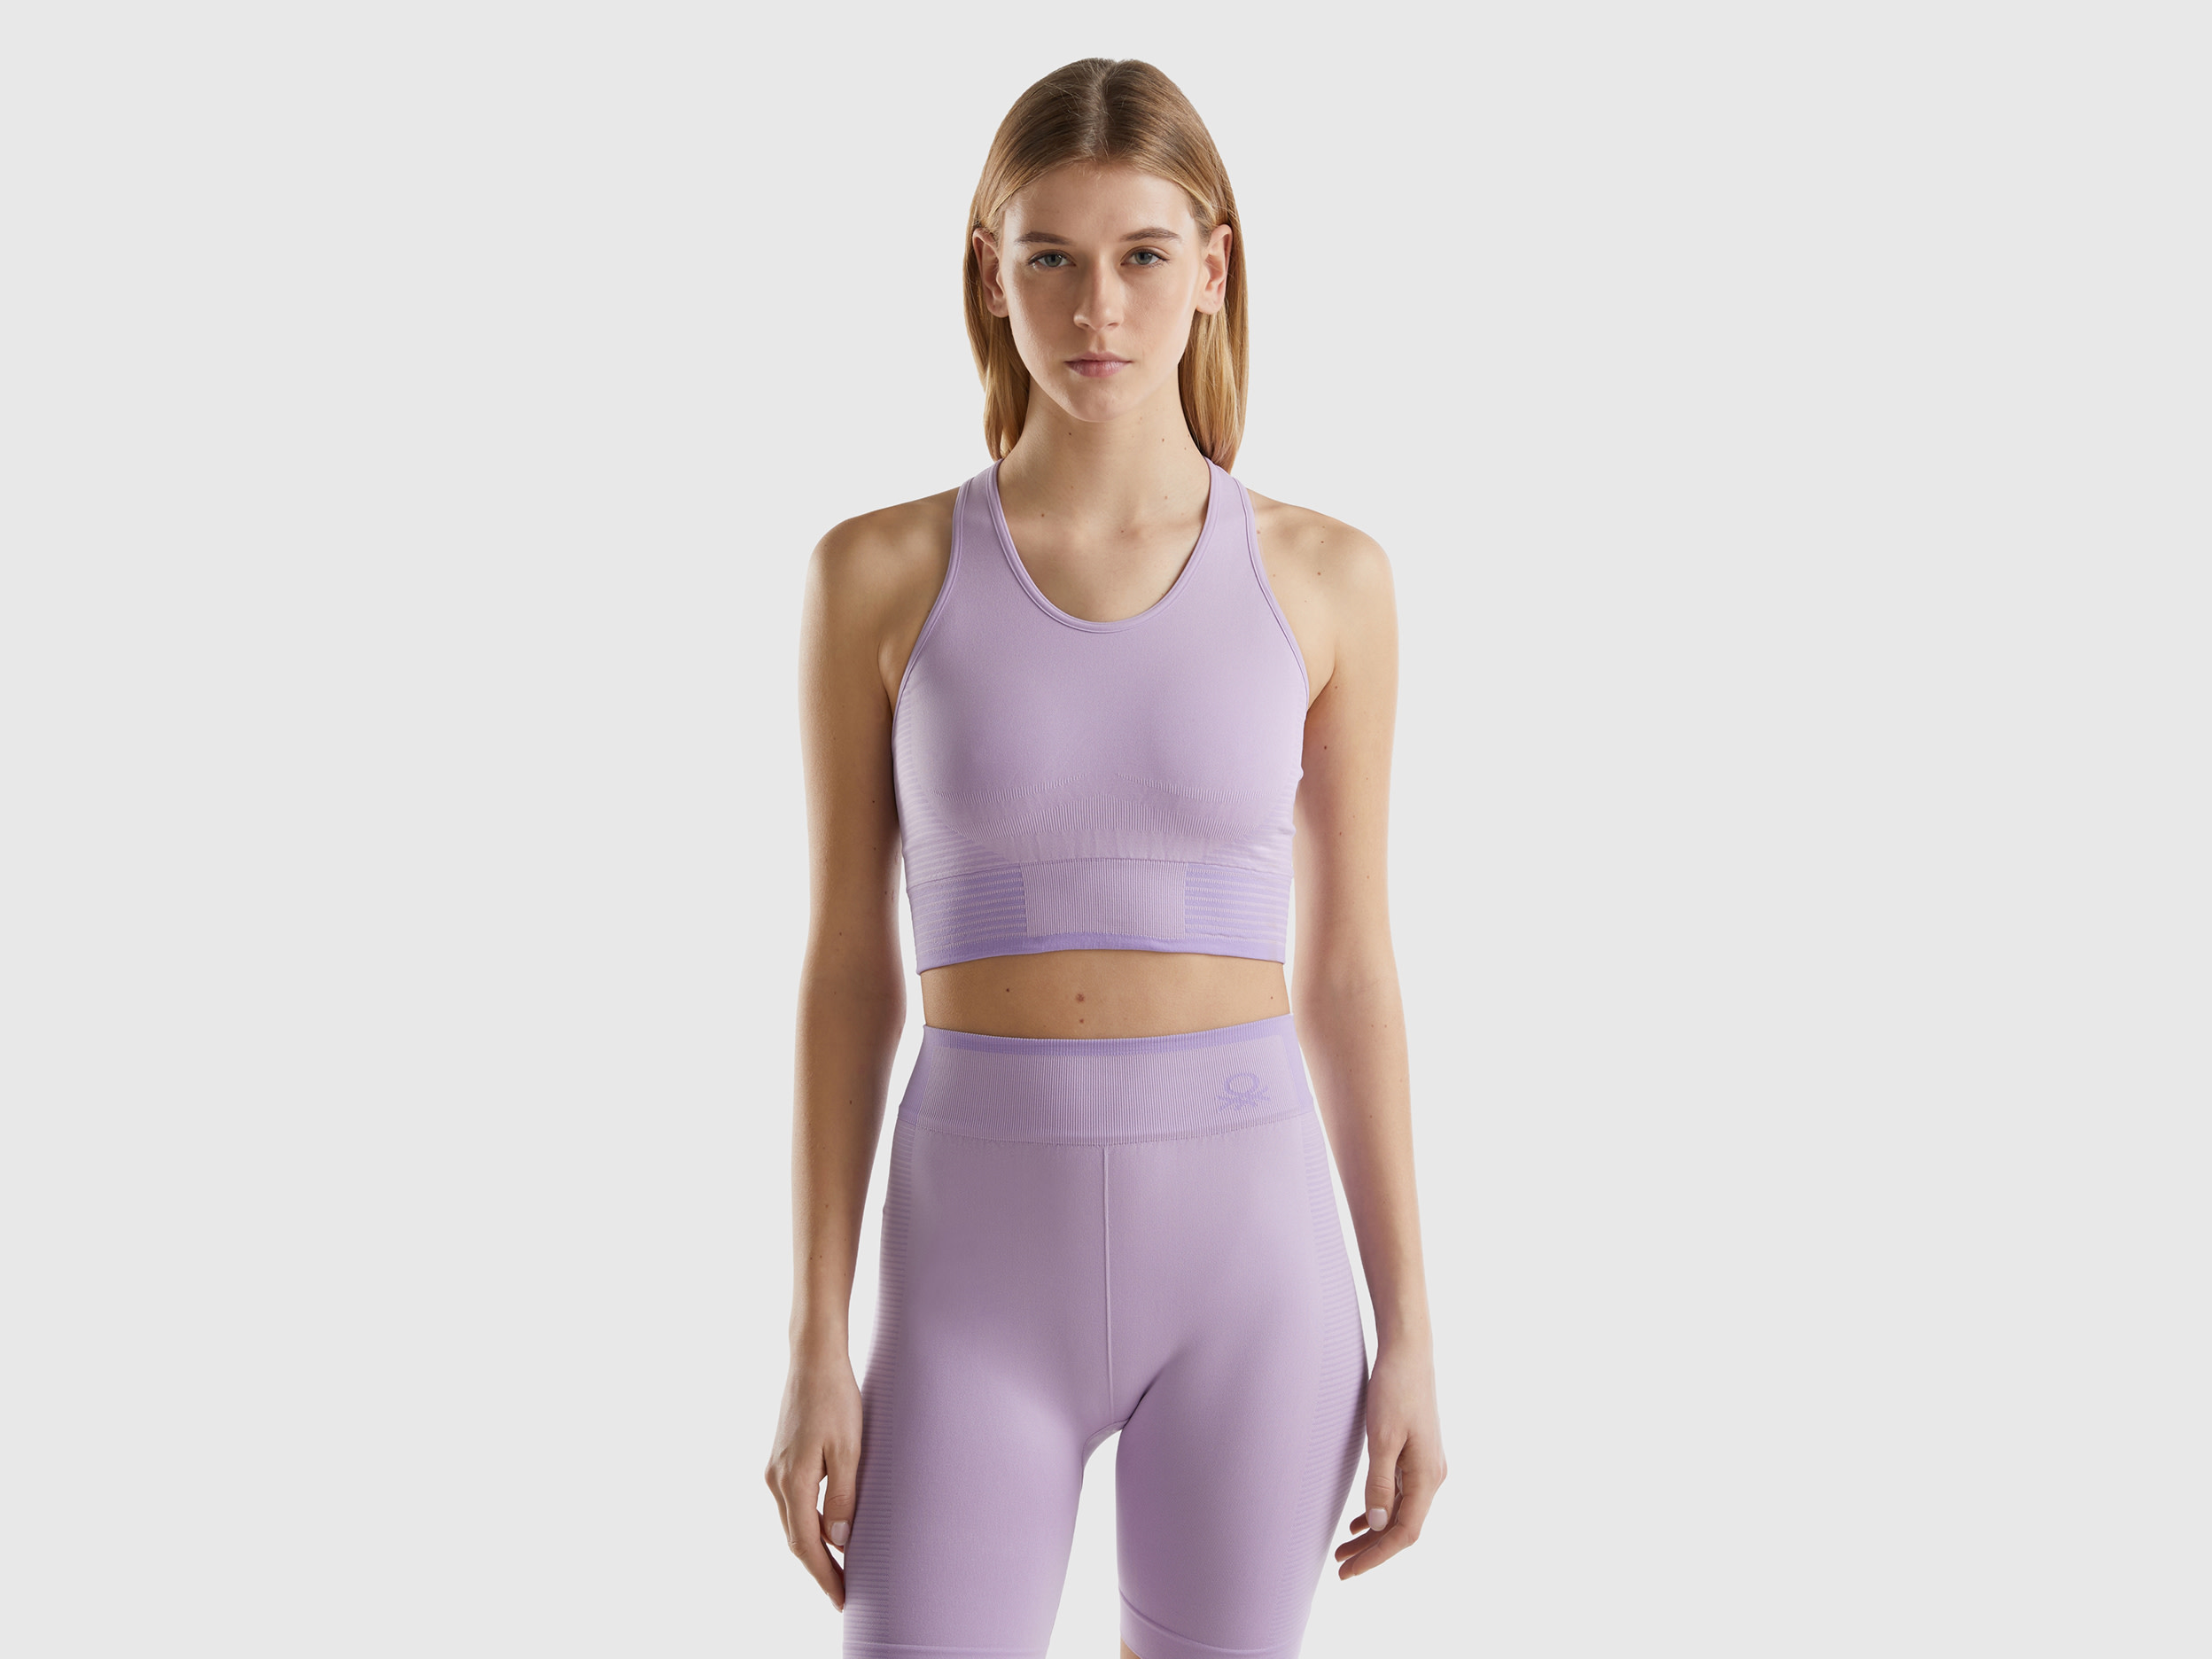 Image of Benetton, Seamless Sports Crop Top, size S, Lilac, Women